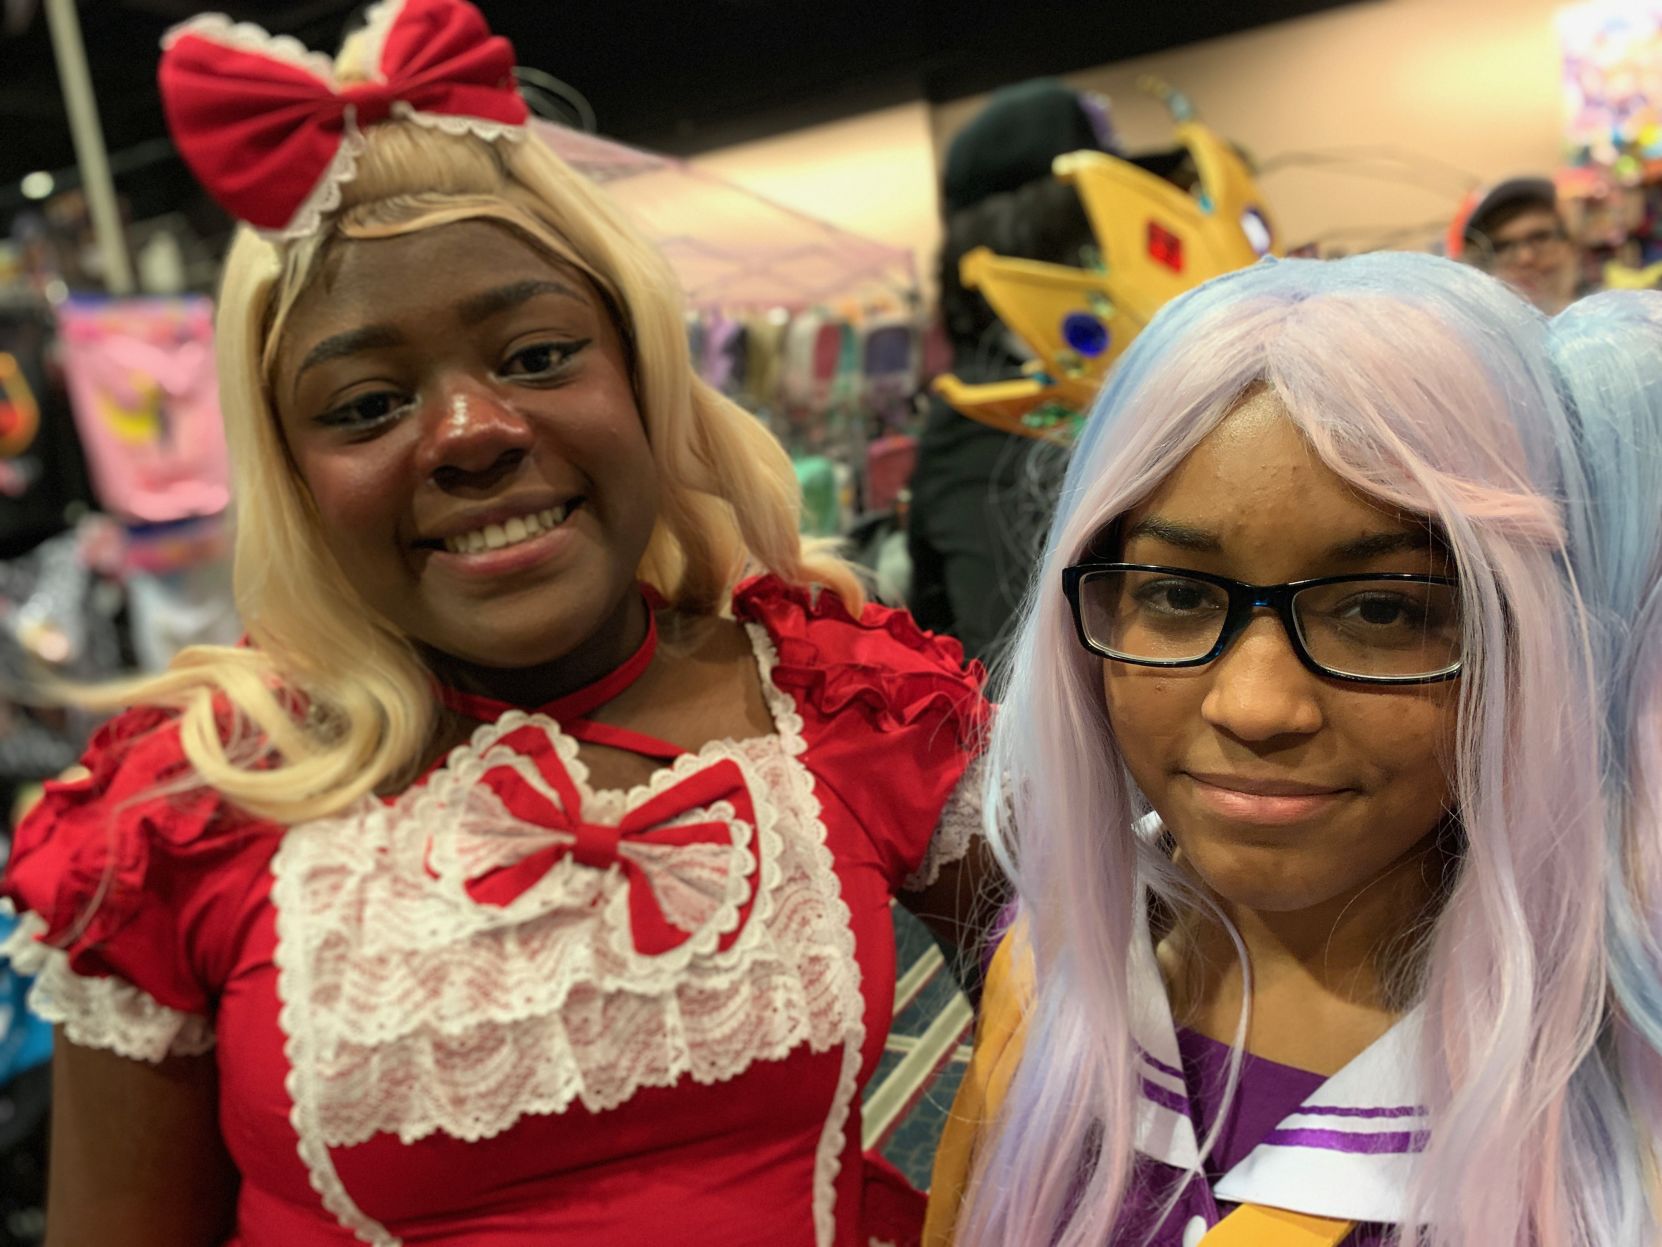 Share more than 52 louisiana anime conventions - in.cdgdbentre